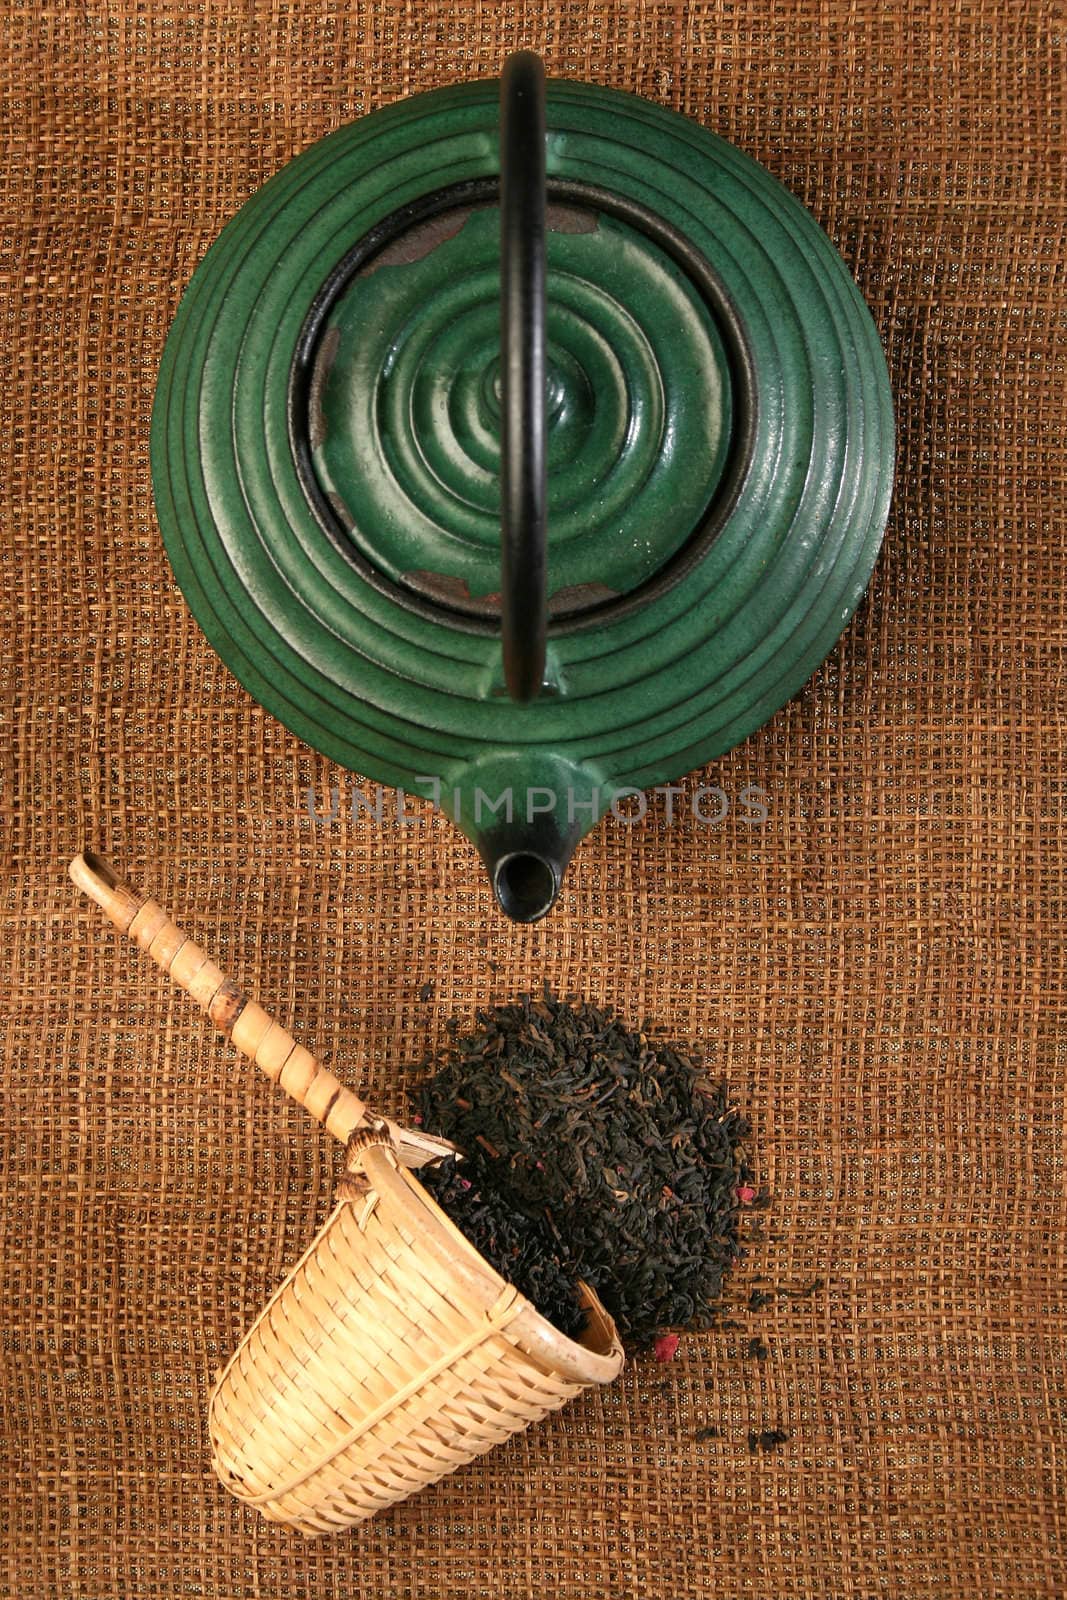 Chinese teapot and a wicker scoop with herb tea leaves. More in gallery